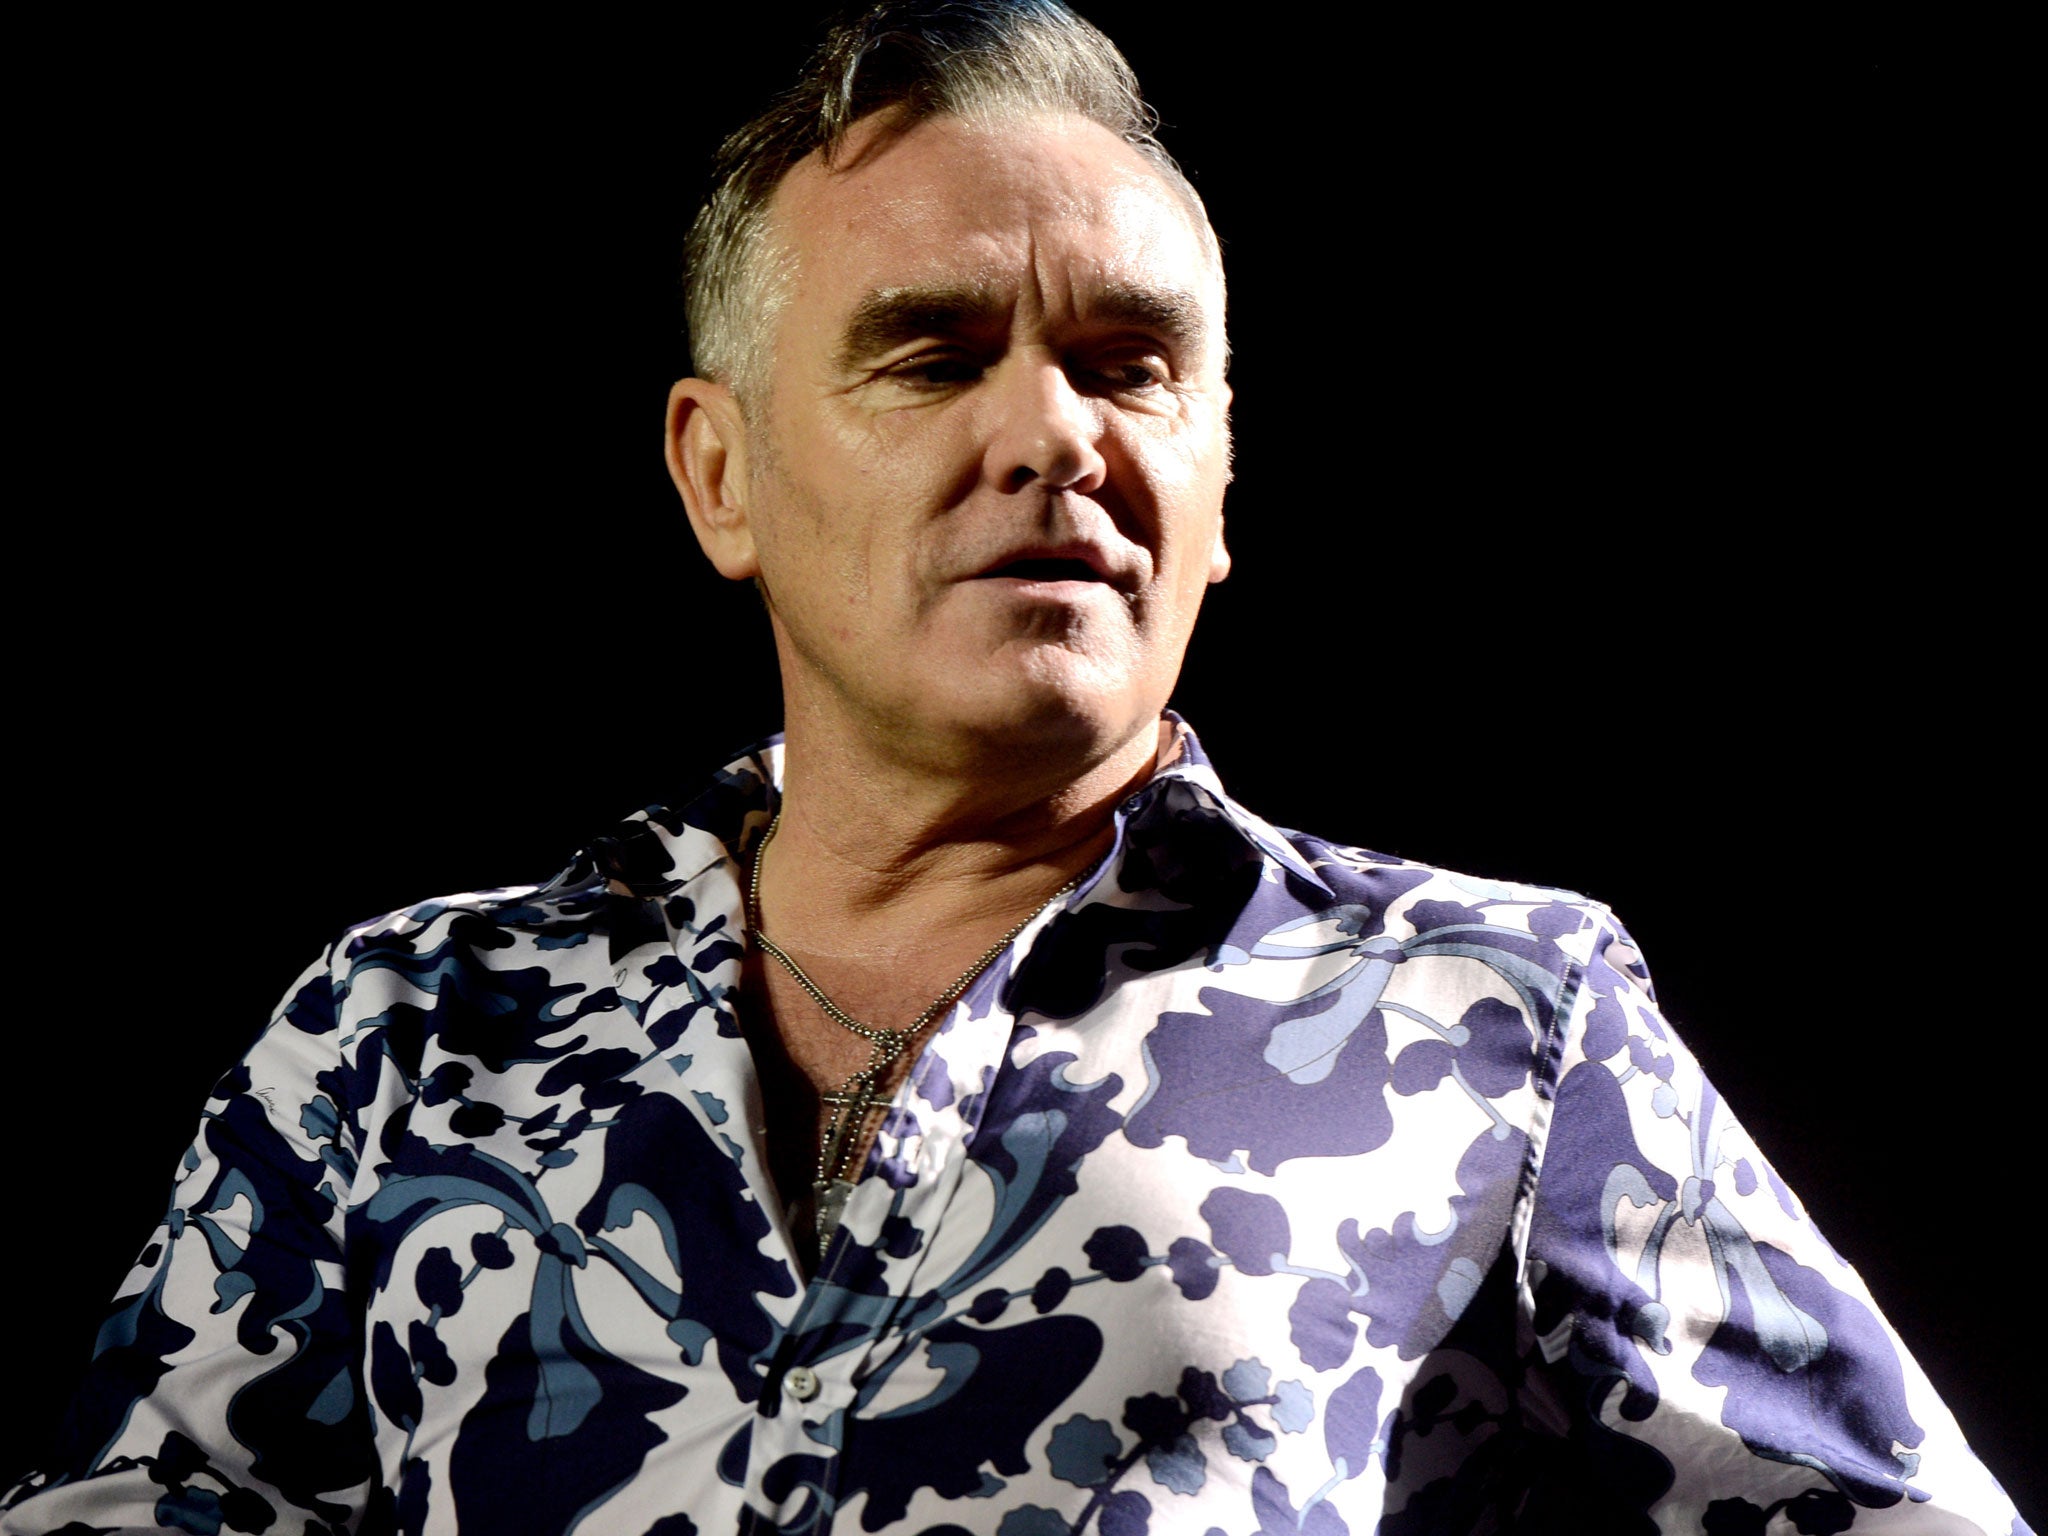 It is thought any appearance by Morrissey in the rural radio soap opera would include his outspoken views on the livestock industry